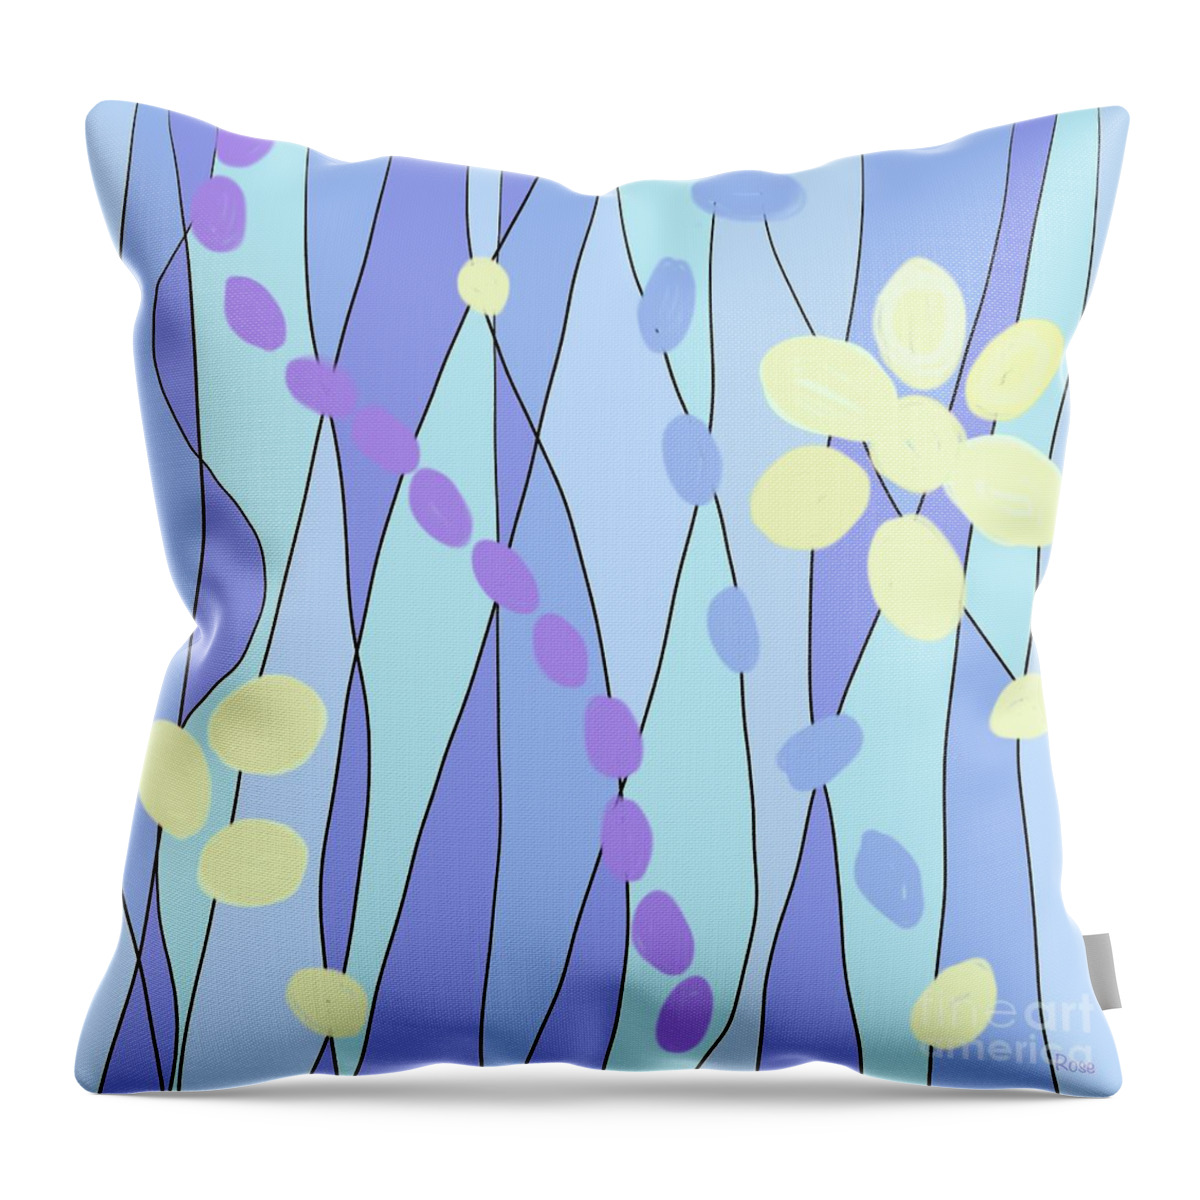 Dreamy Art Throw Pillow featuring the digital art Sweet wishes by Elaine Hayward